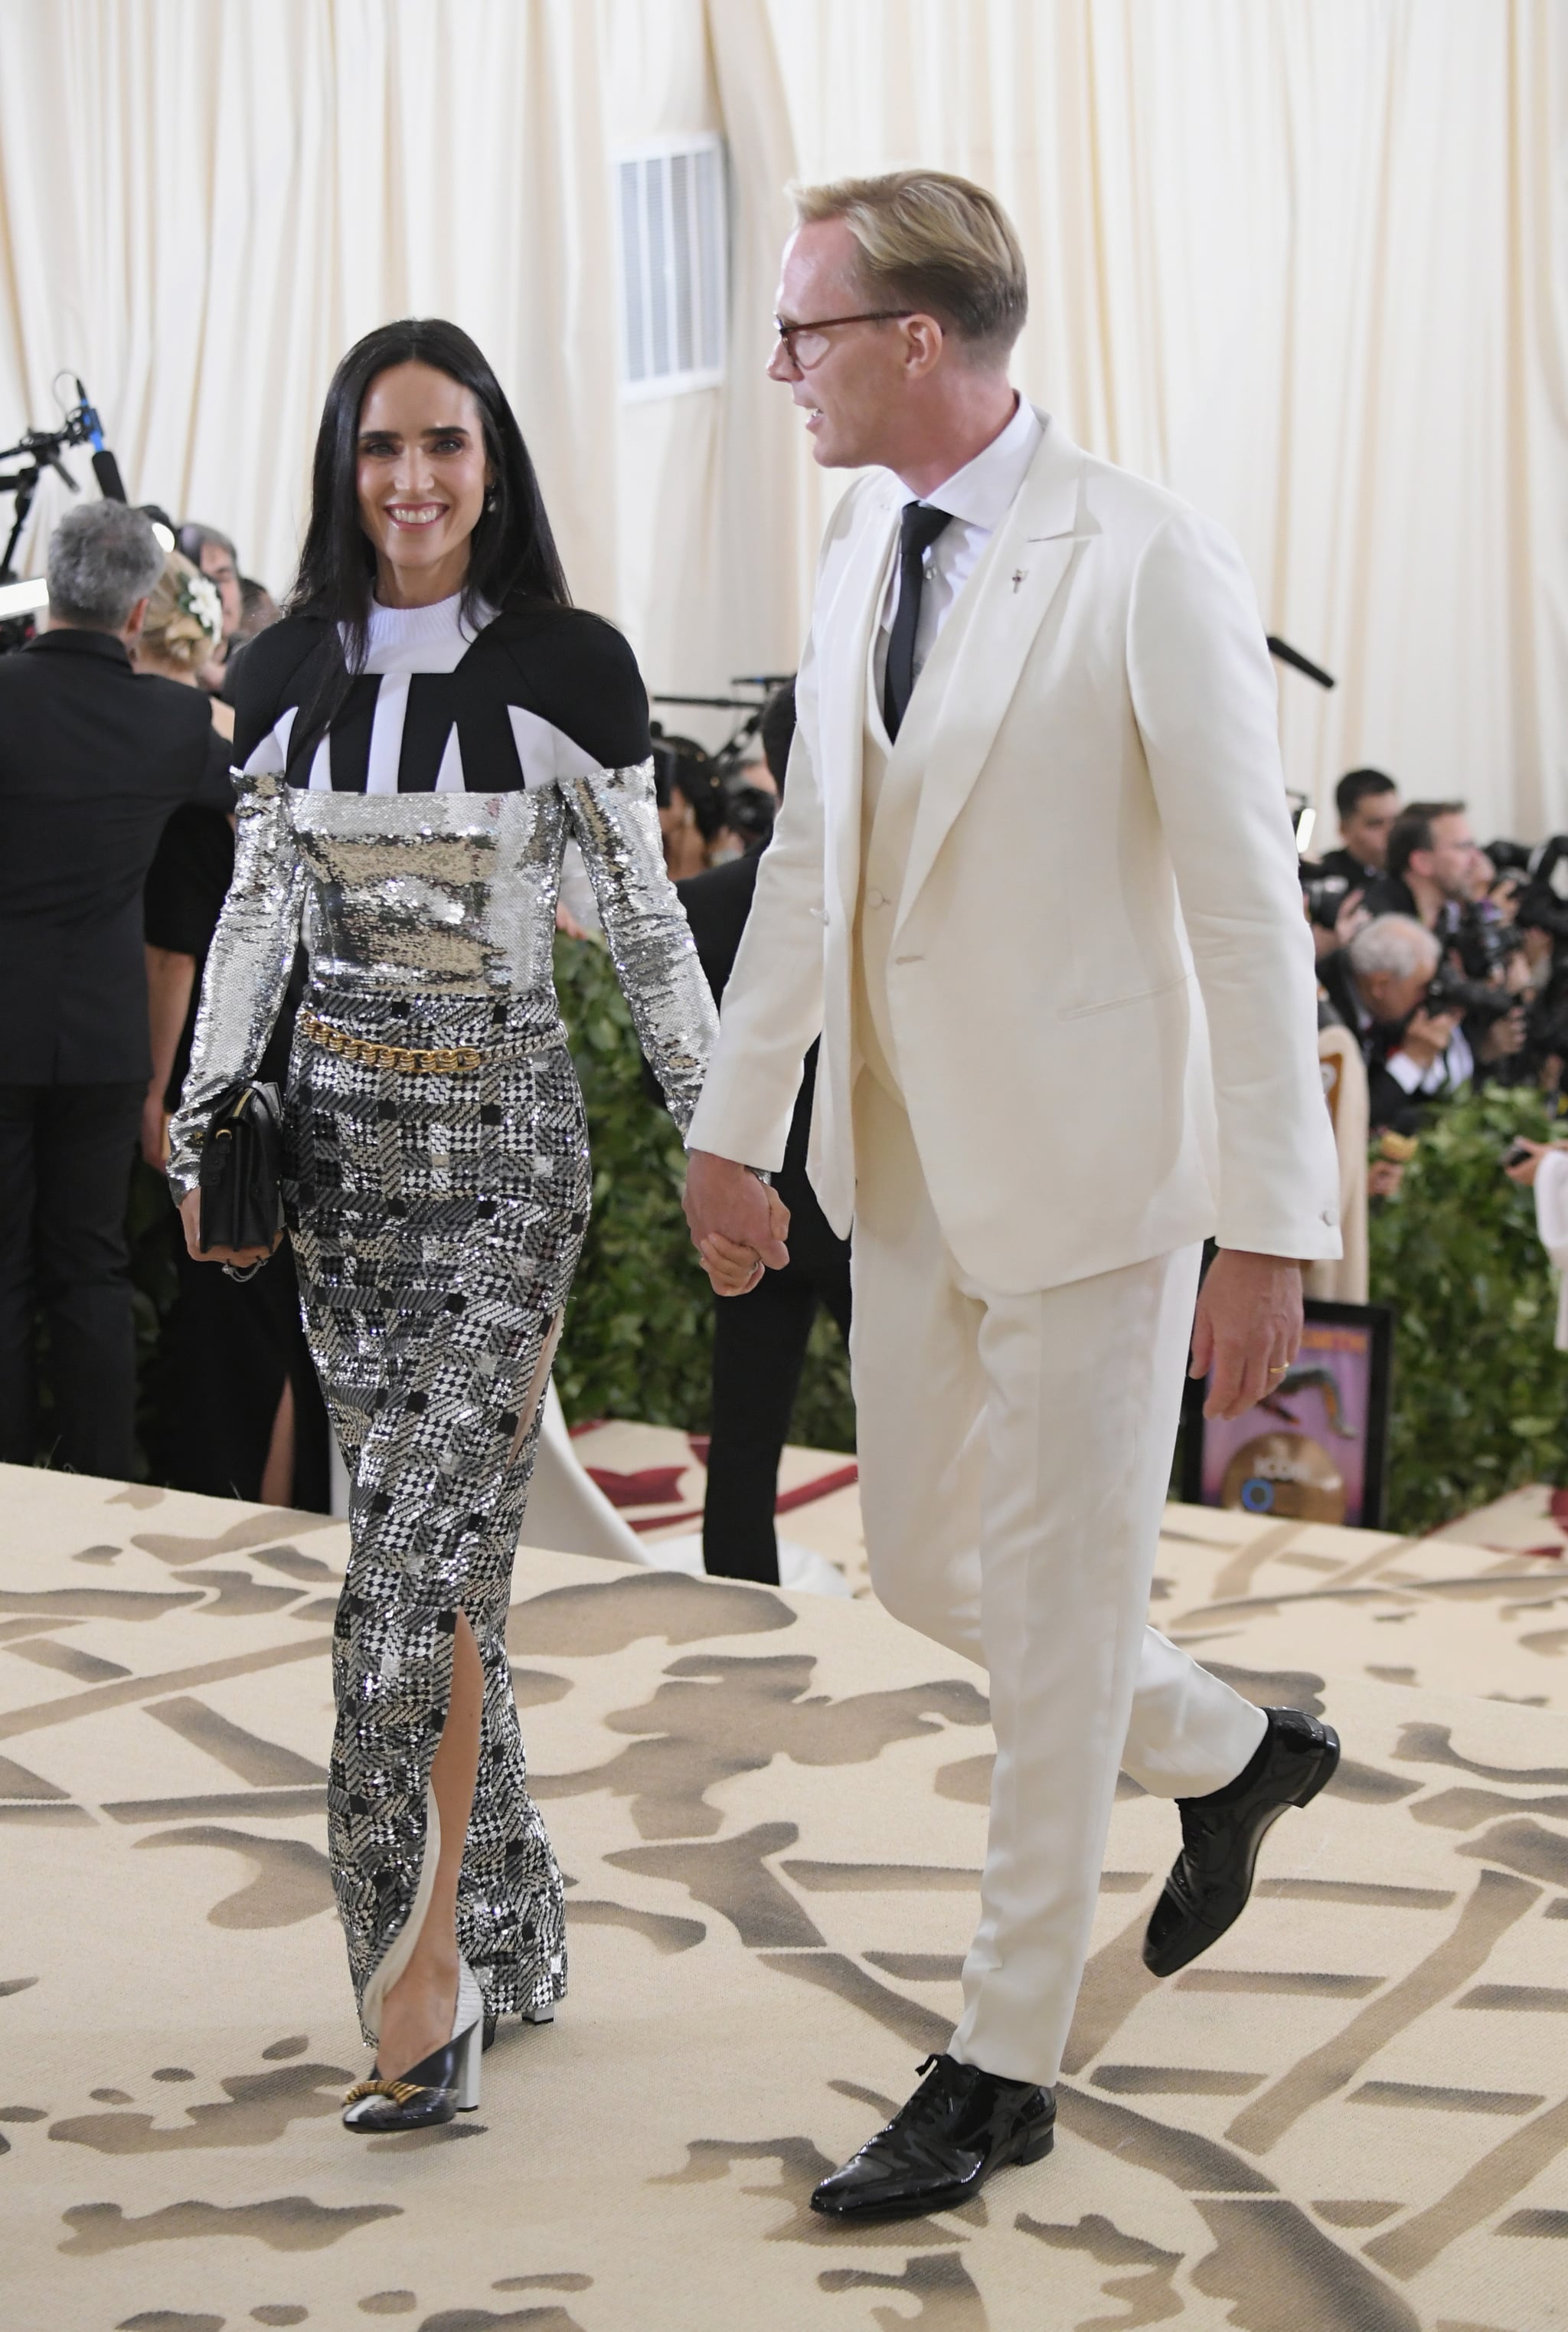 Pictured: Jennifer Connelly and Paul Bettany, 100+ Met Gala Pictures That  Will Put You in the Middle of All the Magic